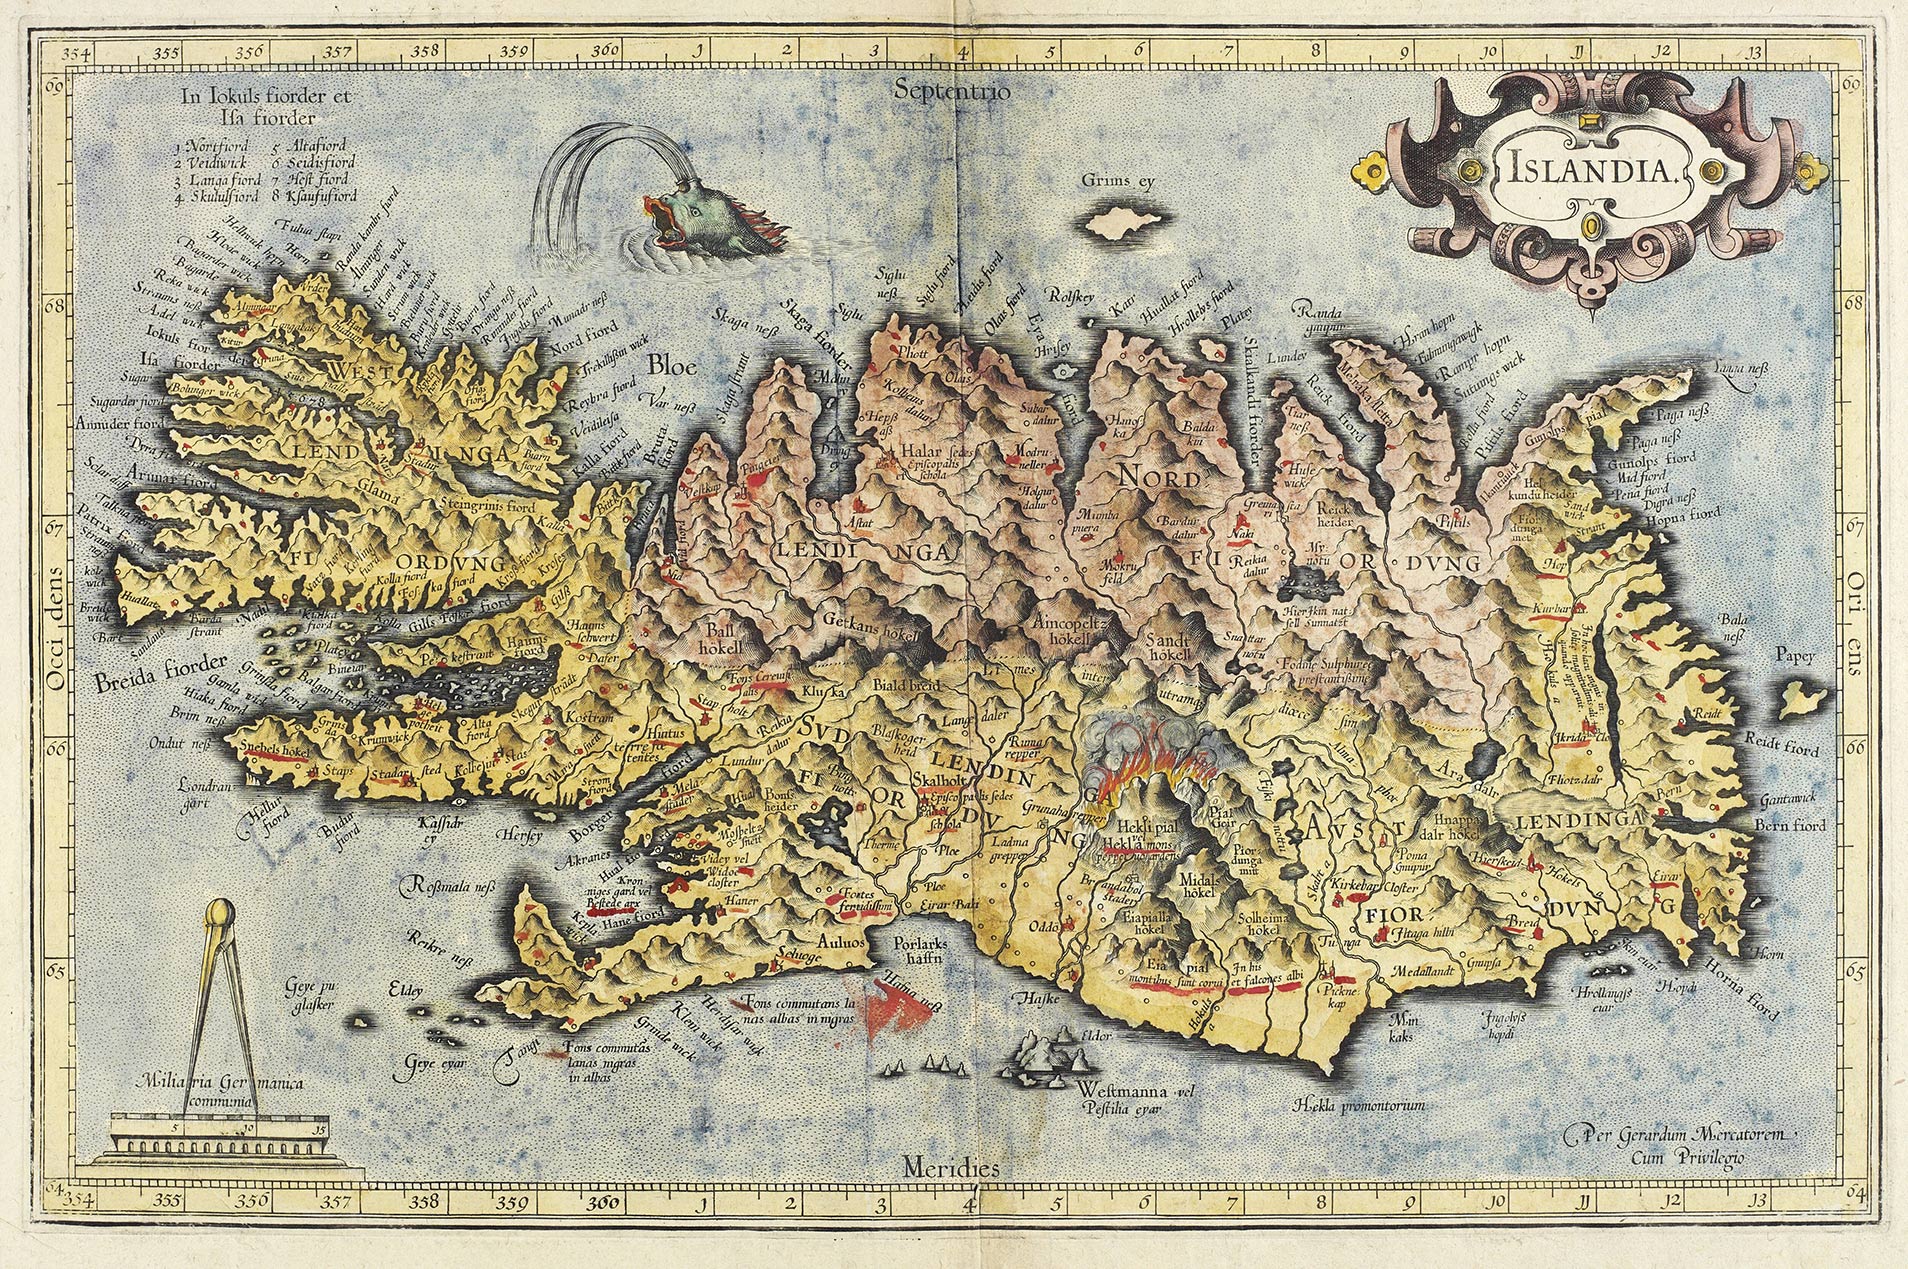 Old map of Iceland from 1500s 